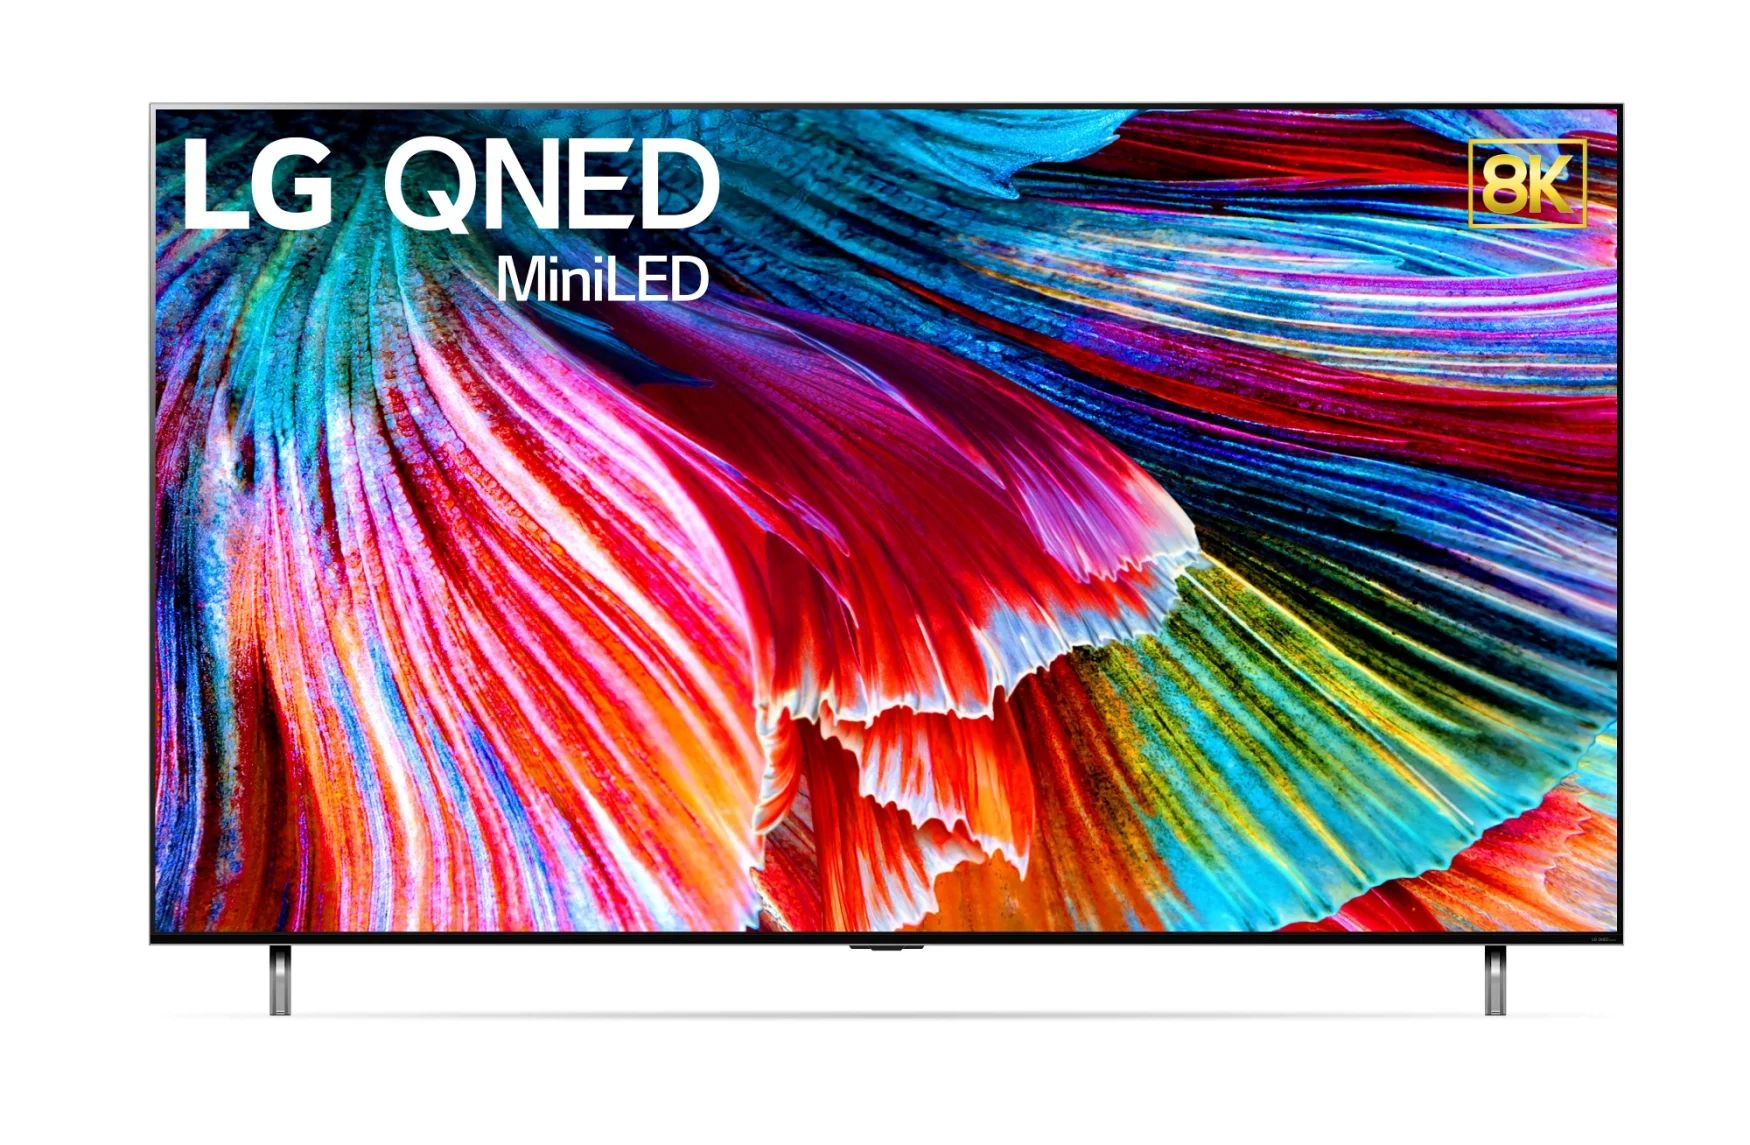 LG's 'QNED' Mini LED TVs are coming to the US in July